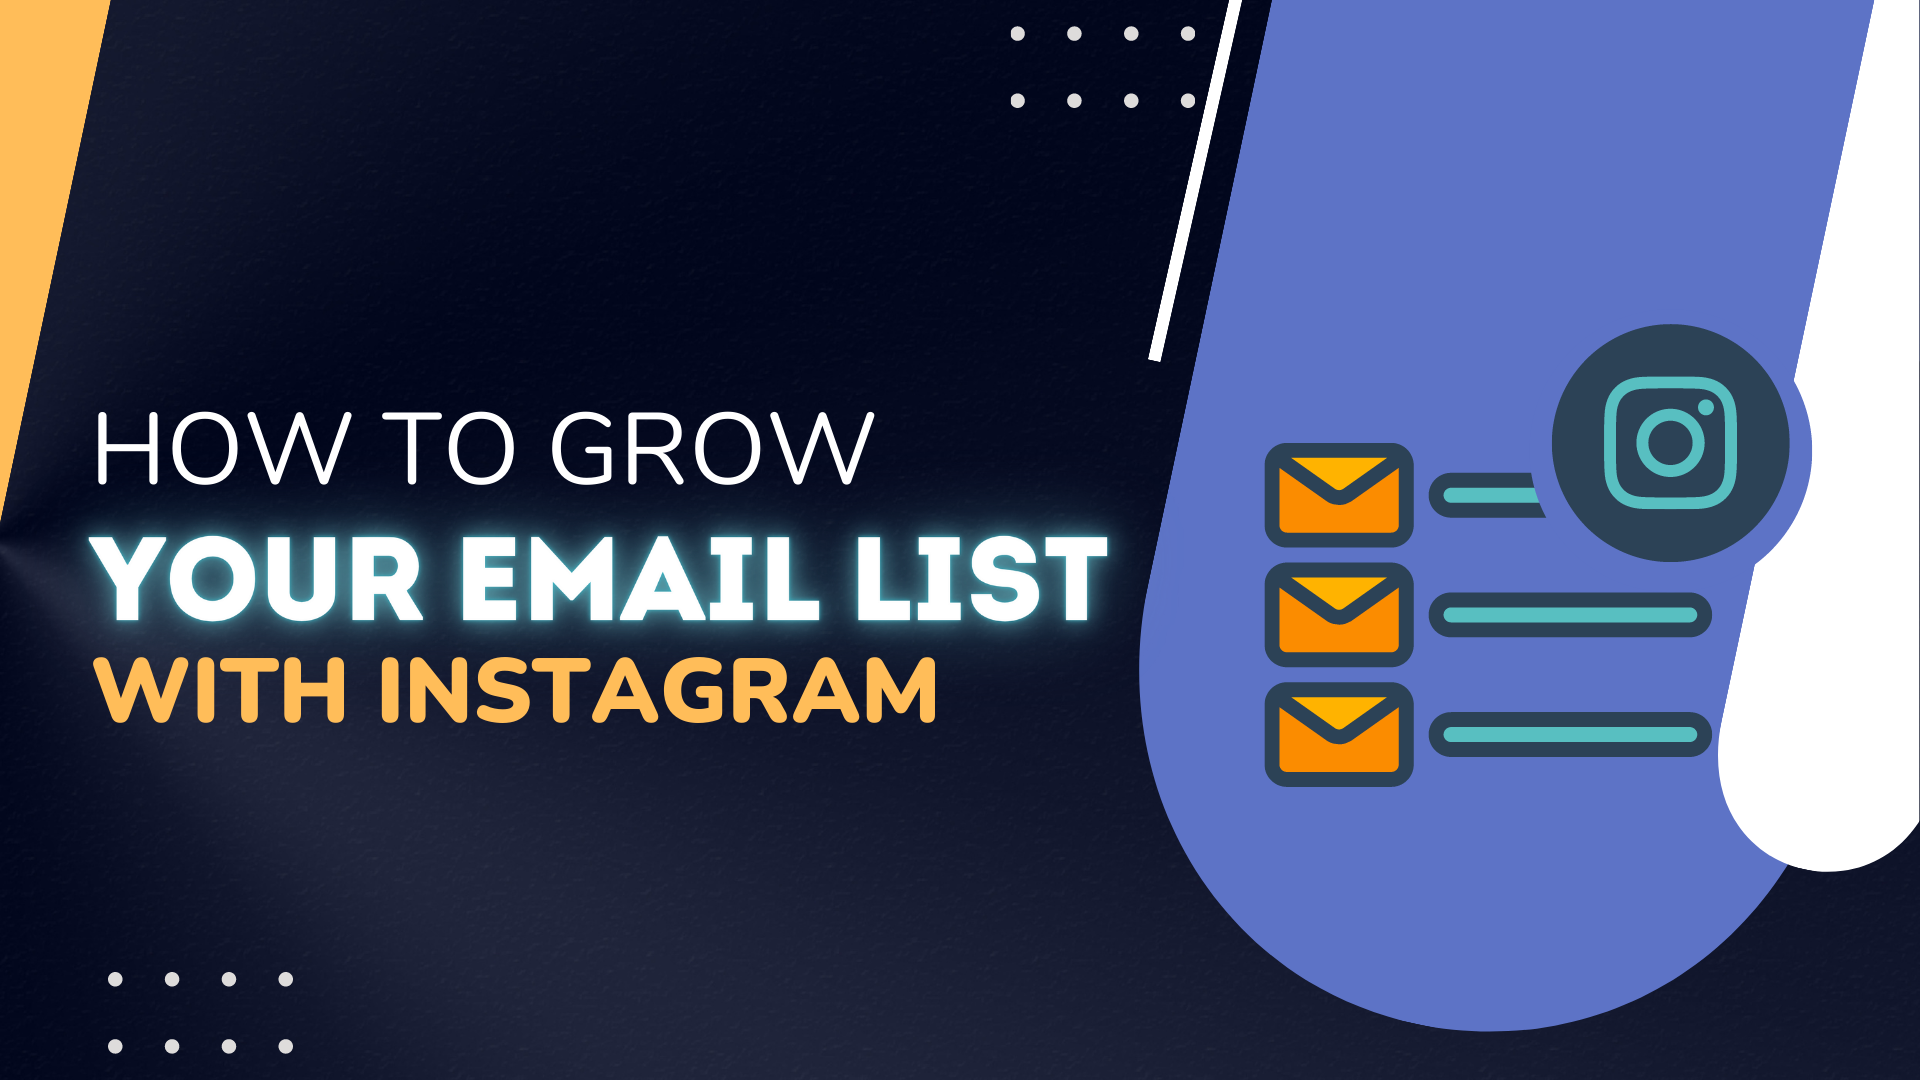 How To Grow Your Email List With Instagram